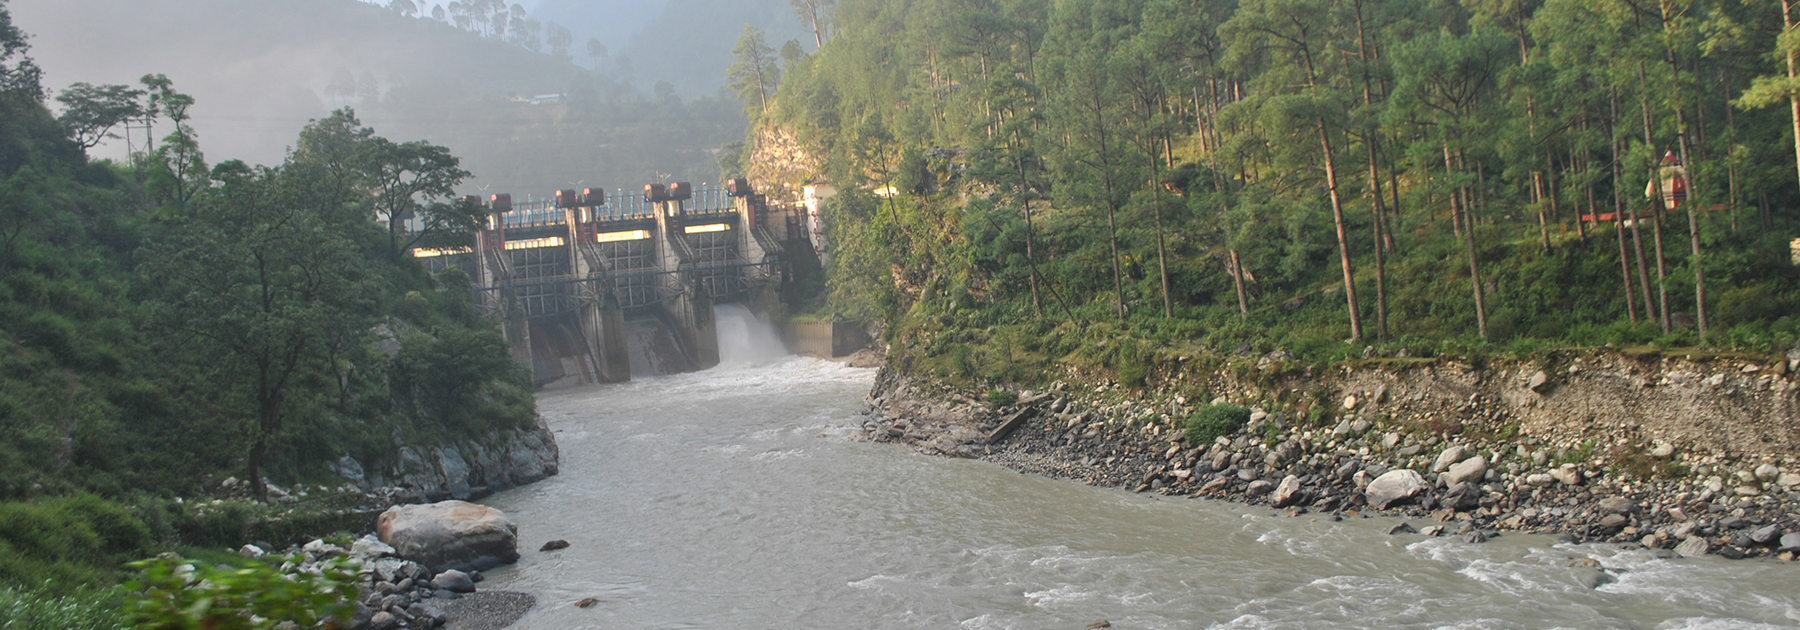 View of the Maneri Dam, a concrete gravity dam, on the Bhagirathi River. (Atudu, licensed under CC BY-SA 4.0)